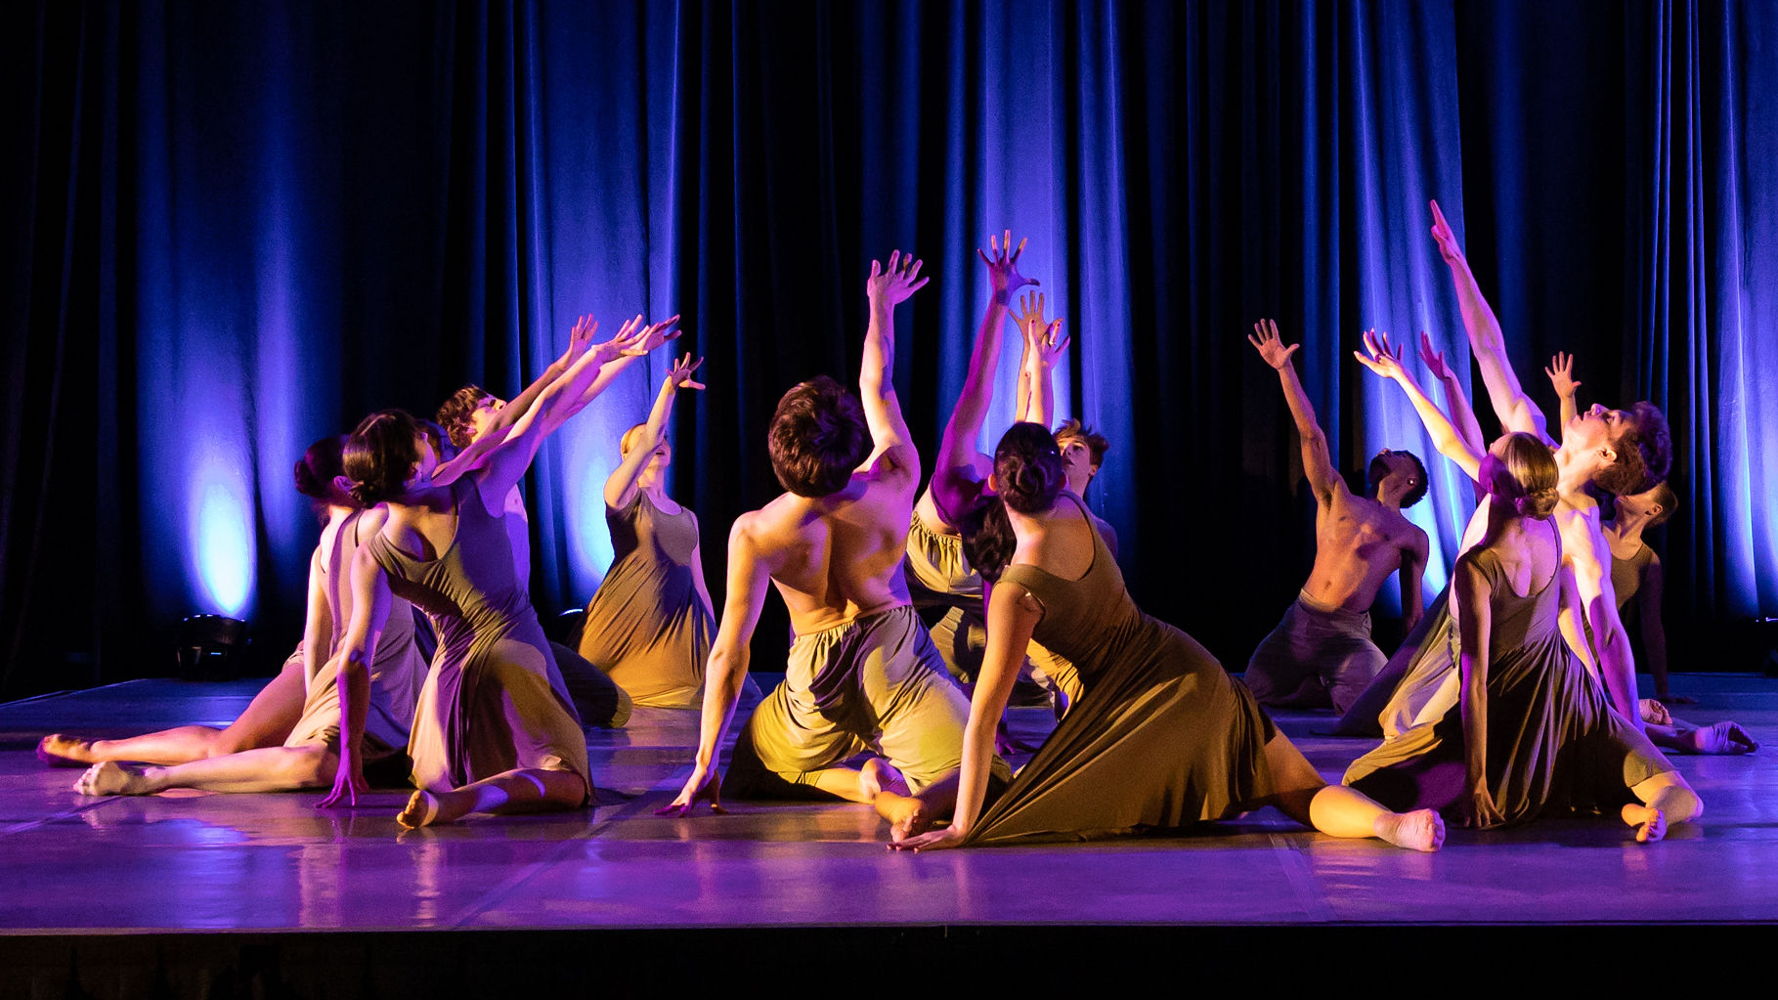 The Academy Dance Department Performs "Storm" Choregraphed by Dance Department Chair Randy Duncan(CREDIT: Michele Marie Photography MicheleMariePhotography.com)